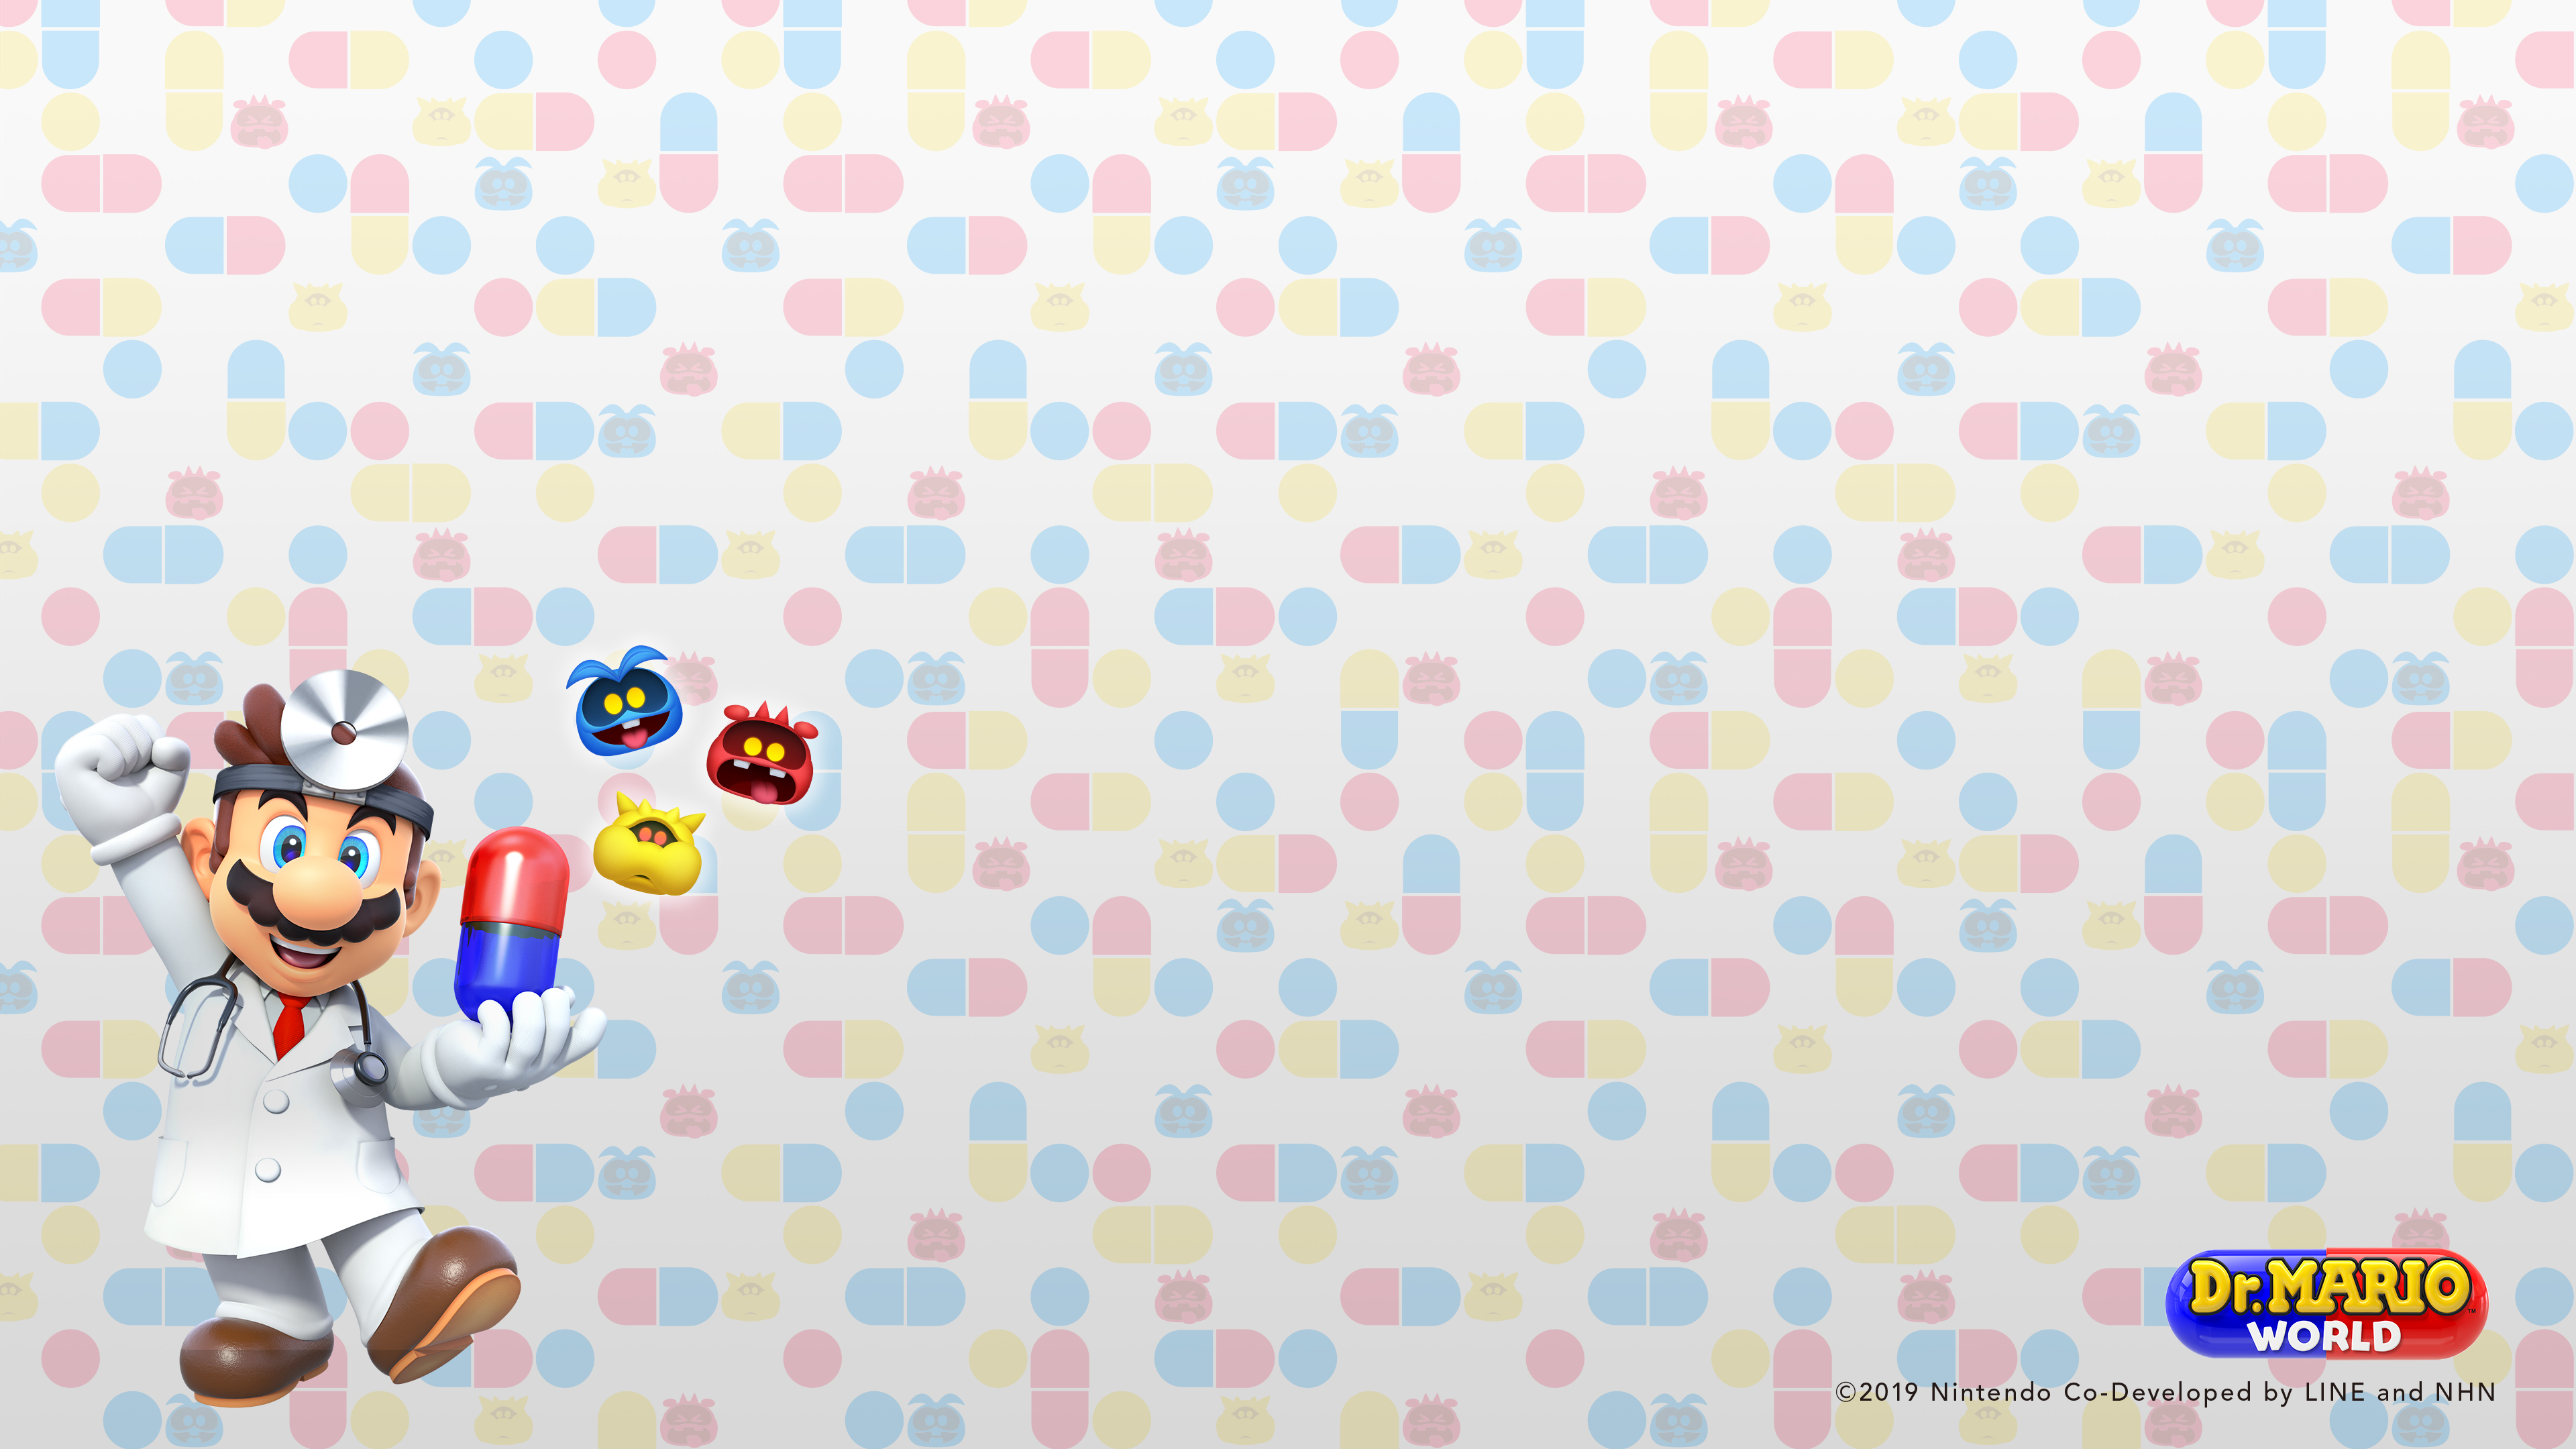 Here Is The Dr Mario World Wallpaper For Those That Don T Have It